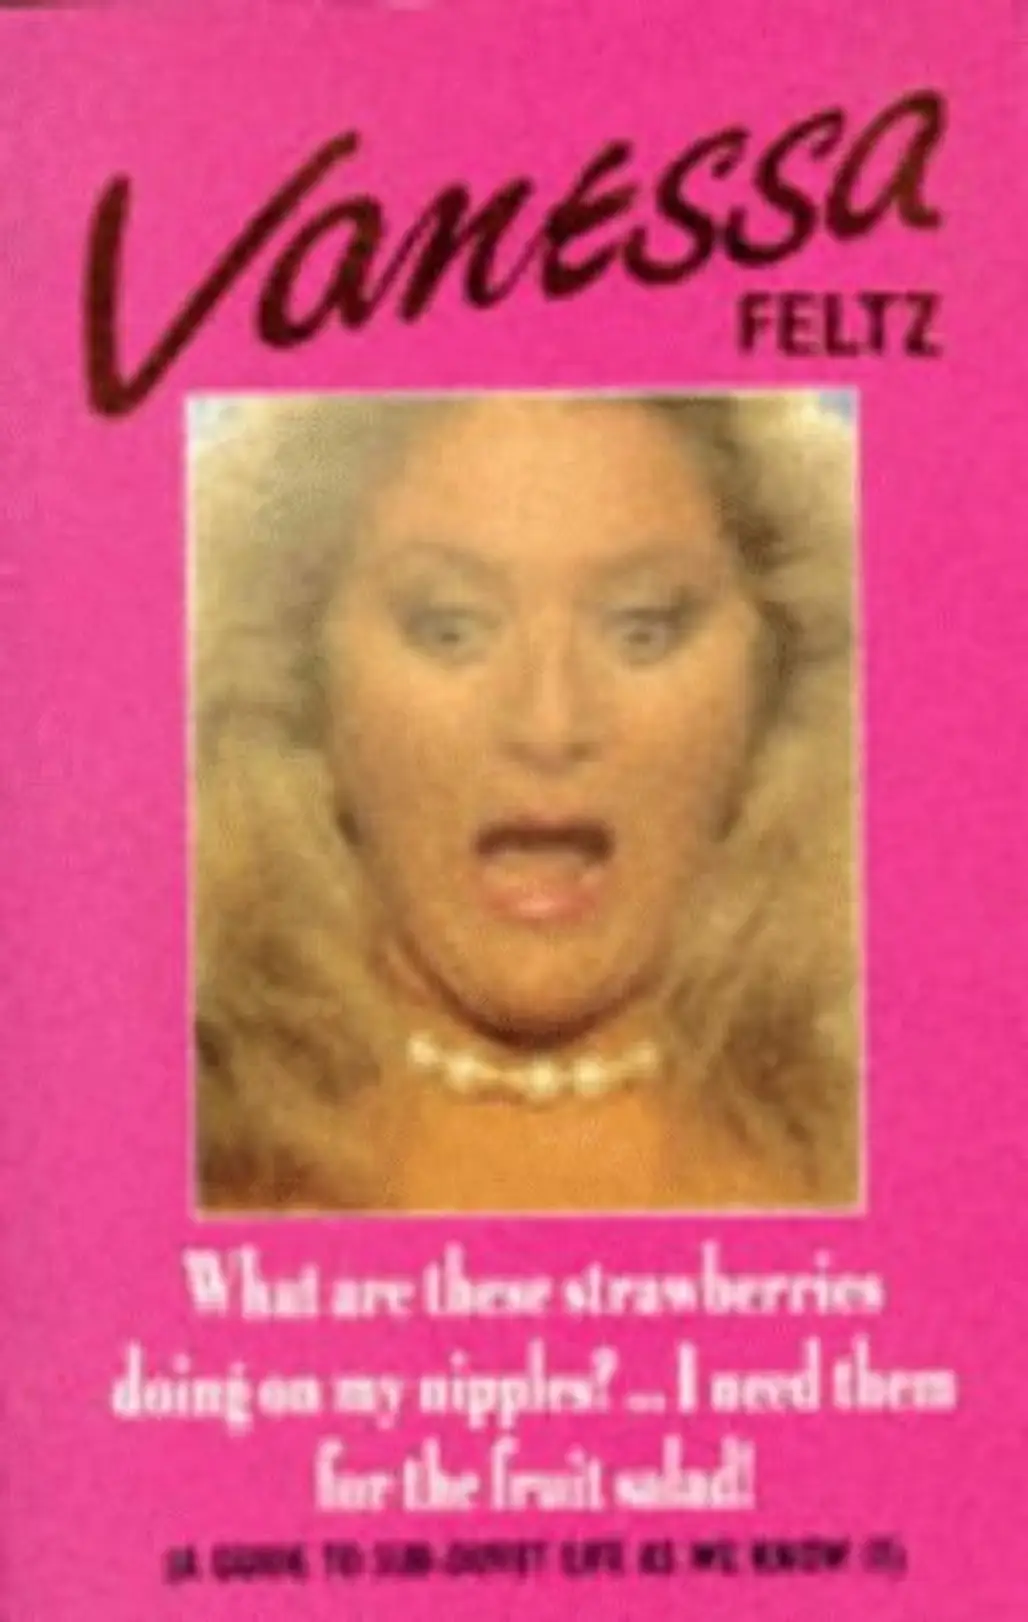 What Are These Strawberries Doing on My Nipples? ... I Need Them for the Fruit Salad! by Vanessa Feltz